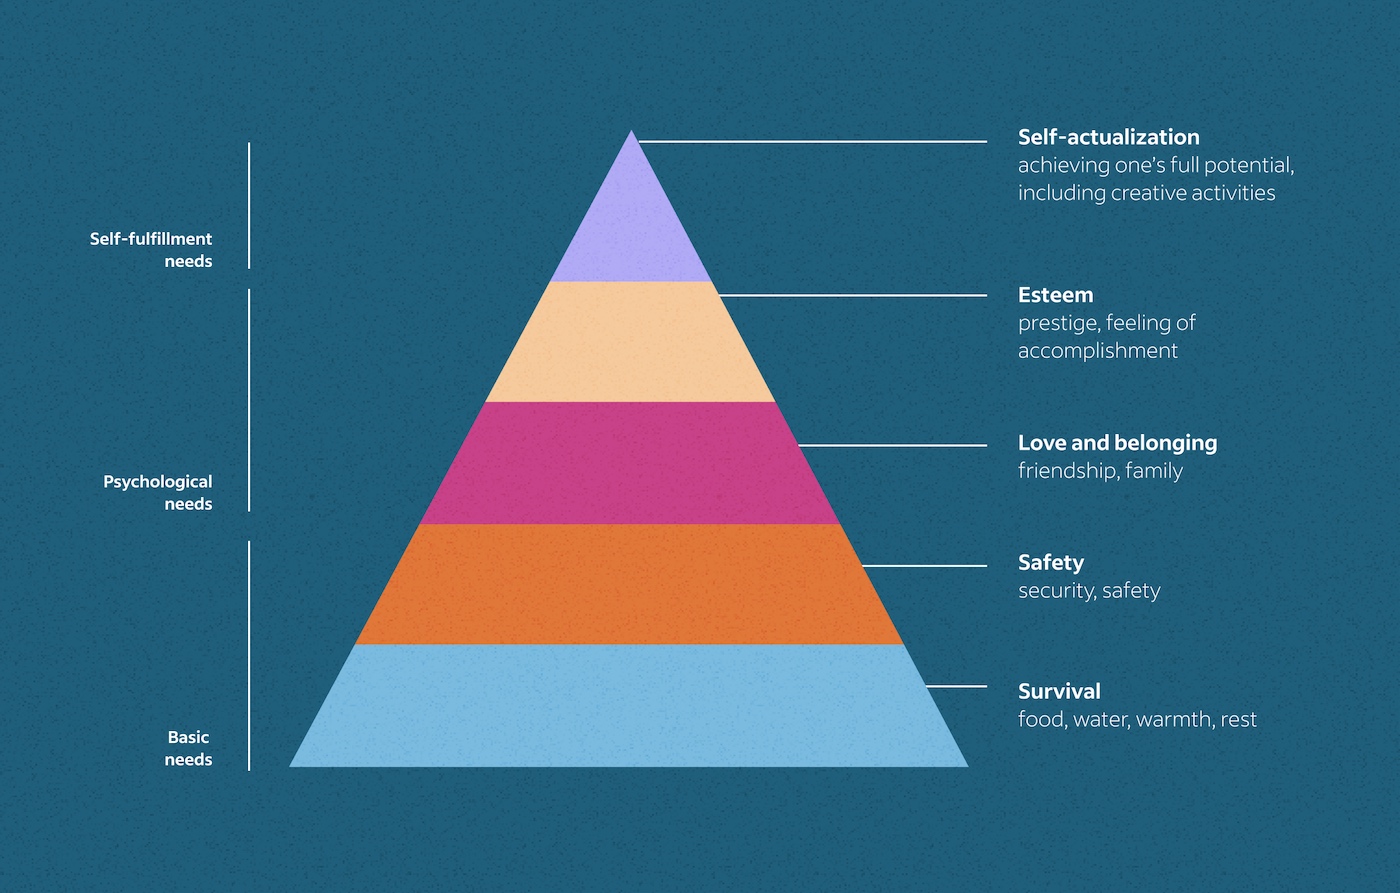 Five-level pyramid with basic needs at bottom, psychological needs in the middle, and self-fulfillment needs at the top.